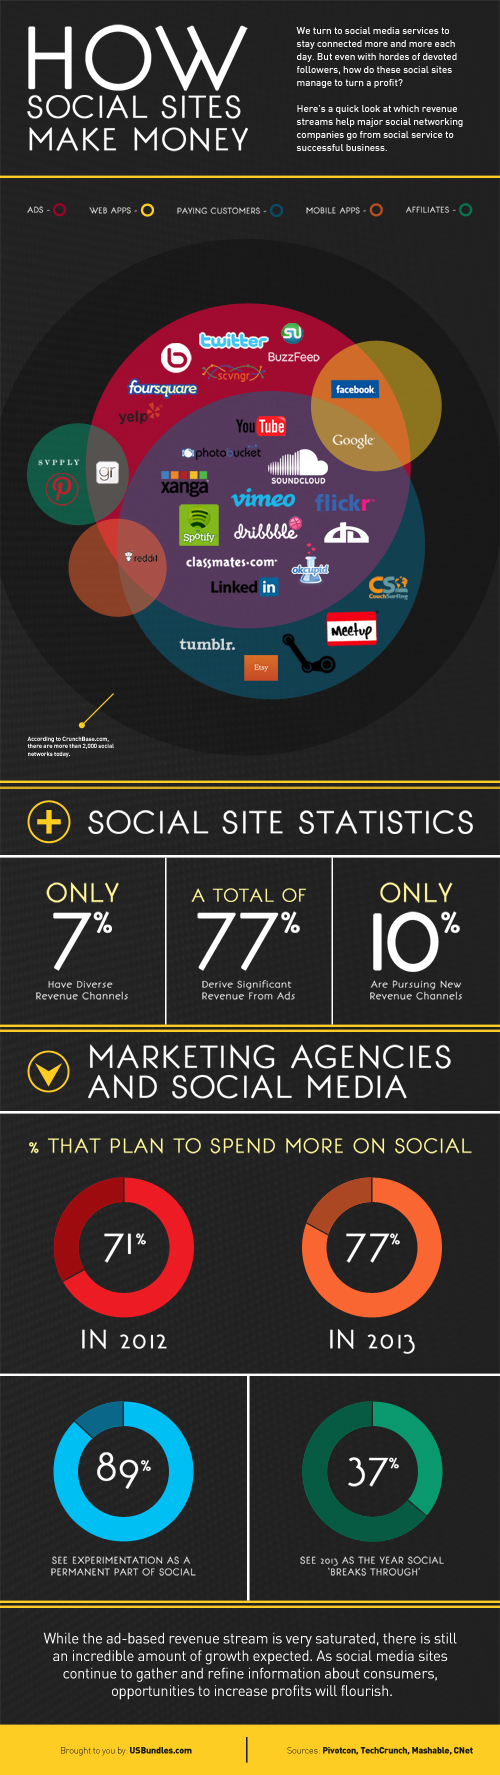 How Social Sites Make Money - An Infographic